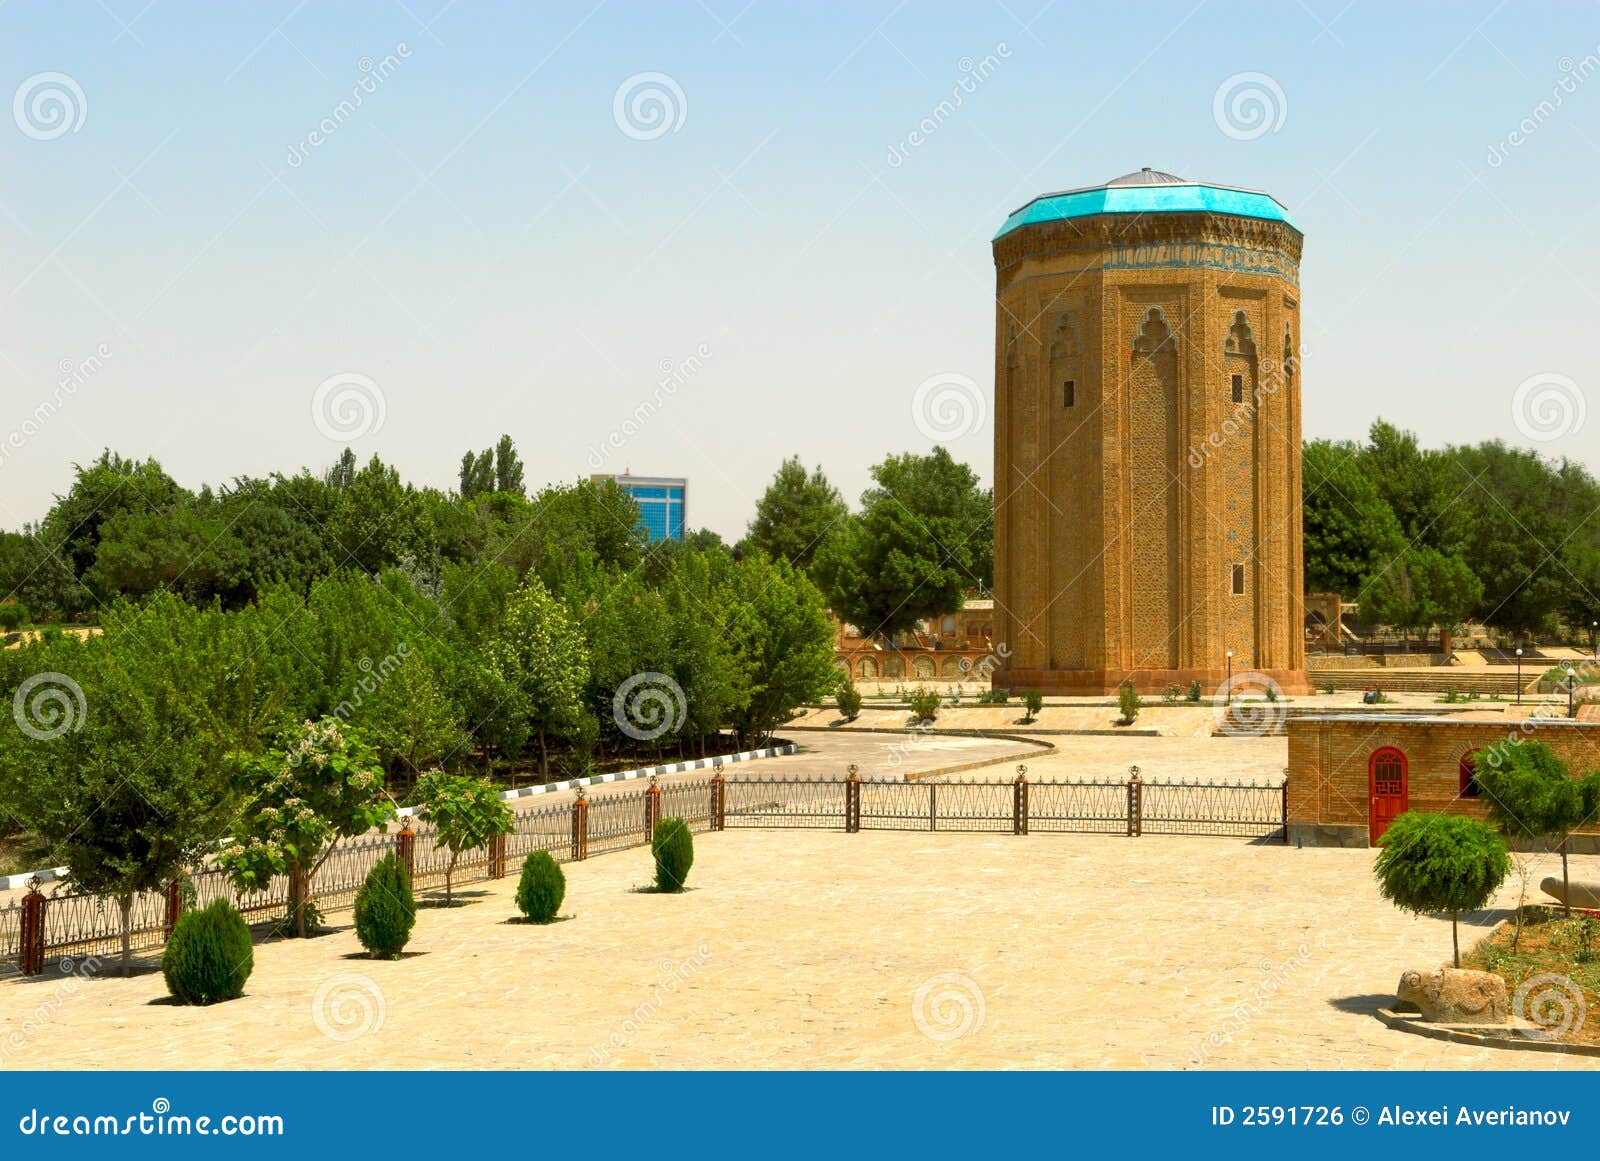 ancient orient tower